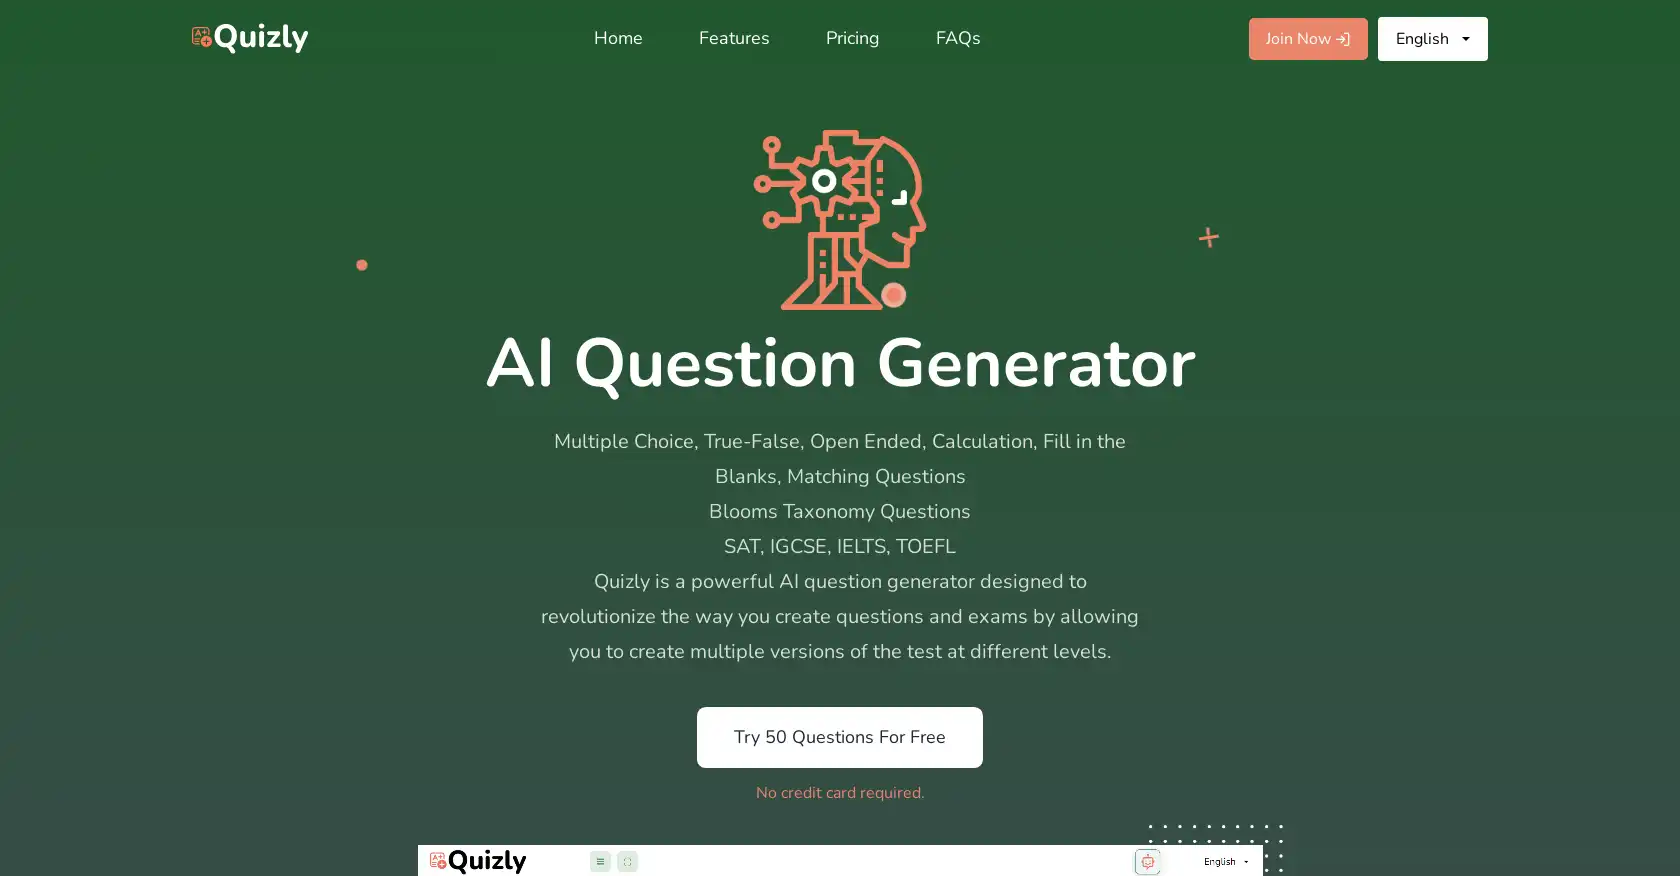 Quizly.ai